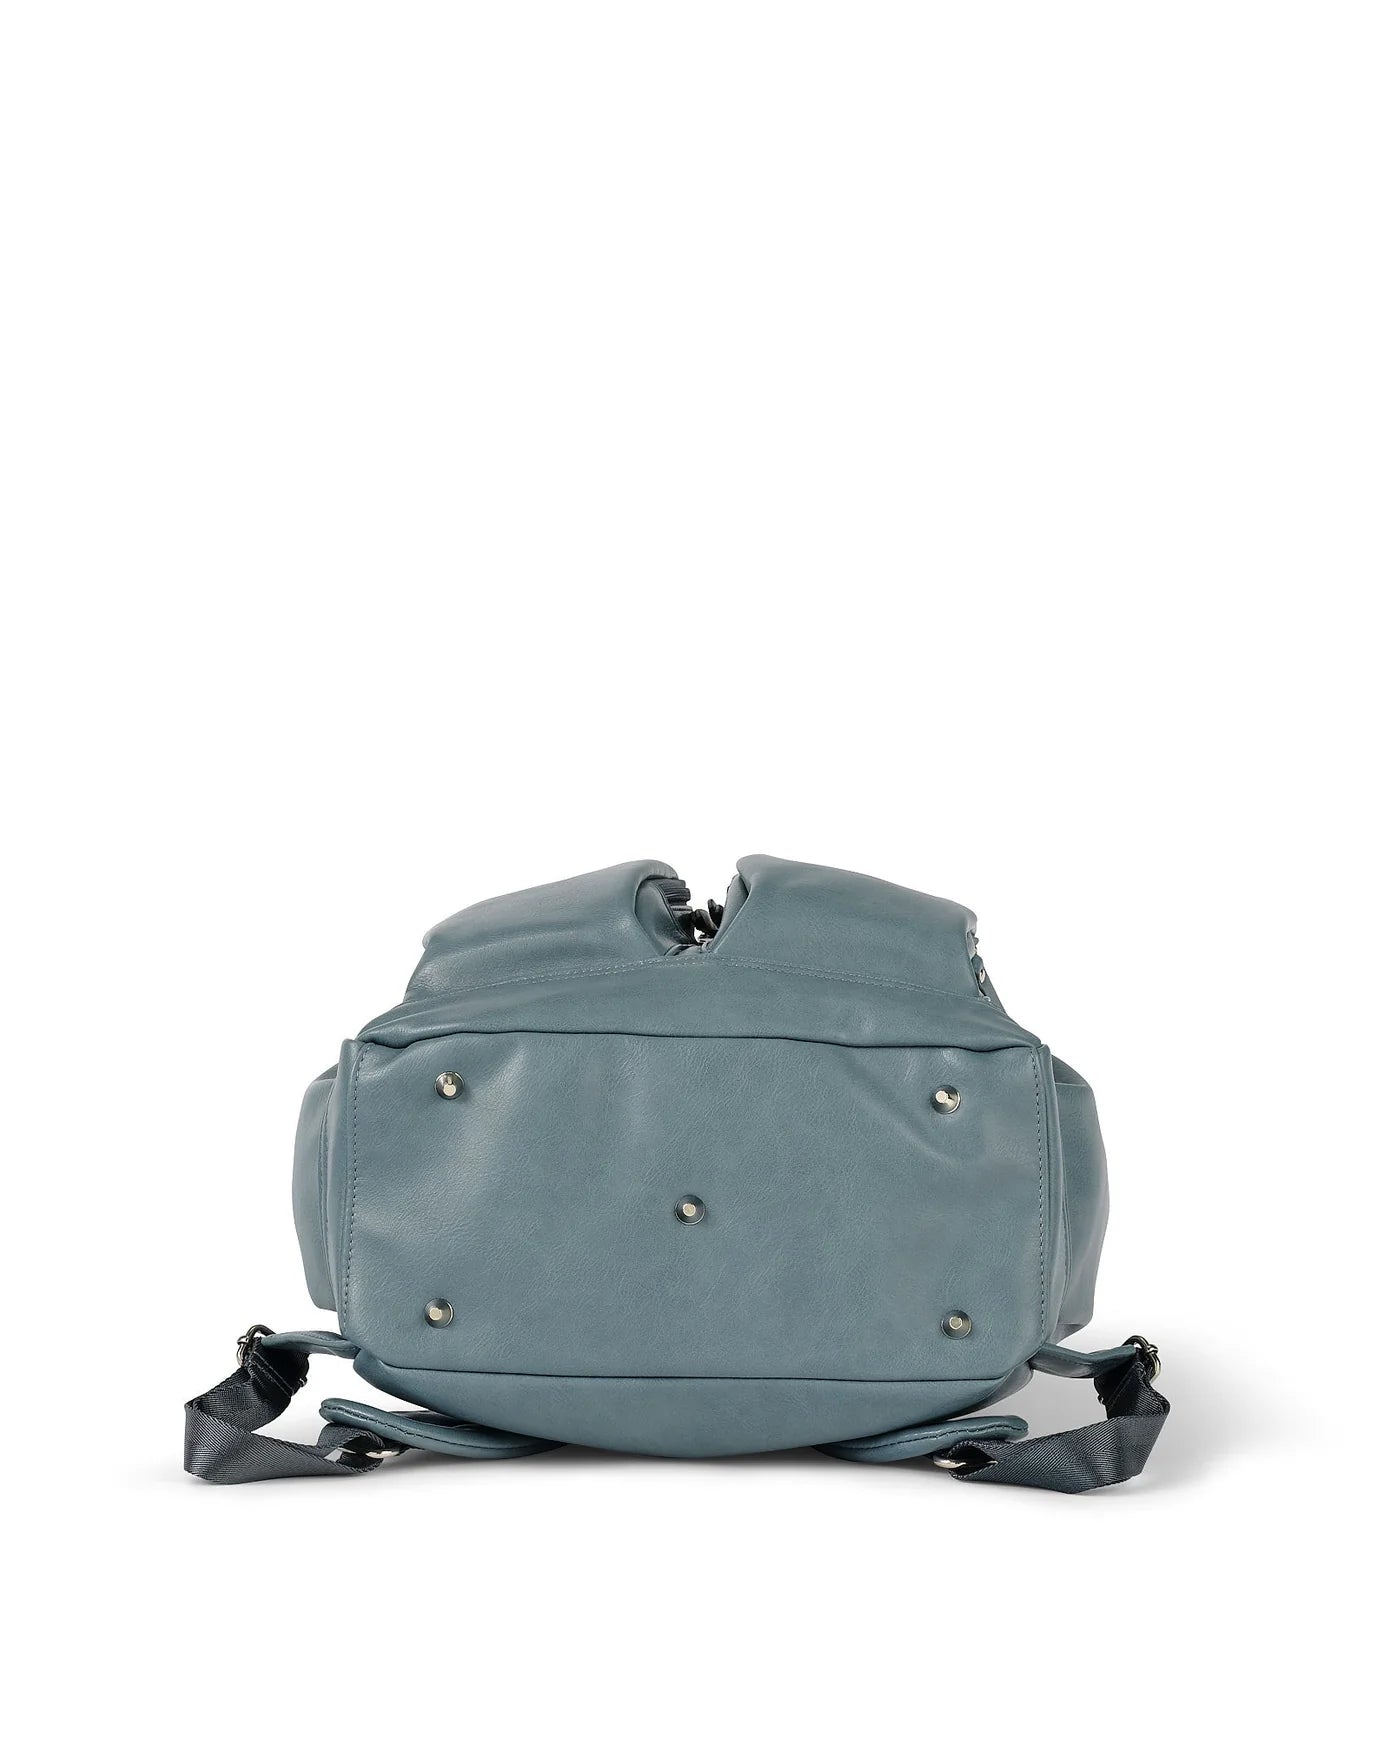 OiOi Vegan Leather Backpack Stone Blue